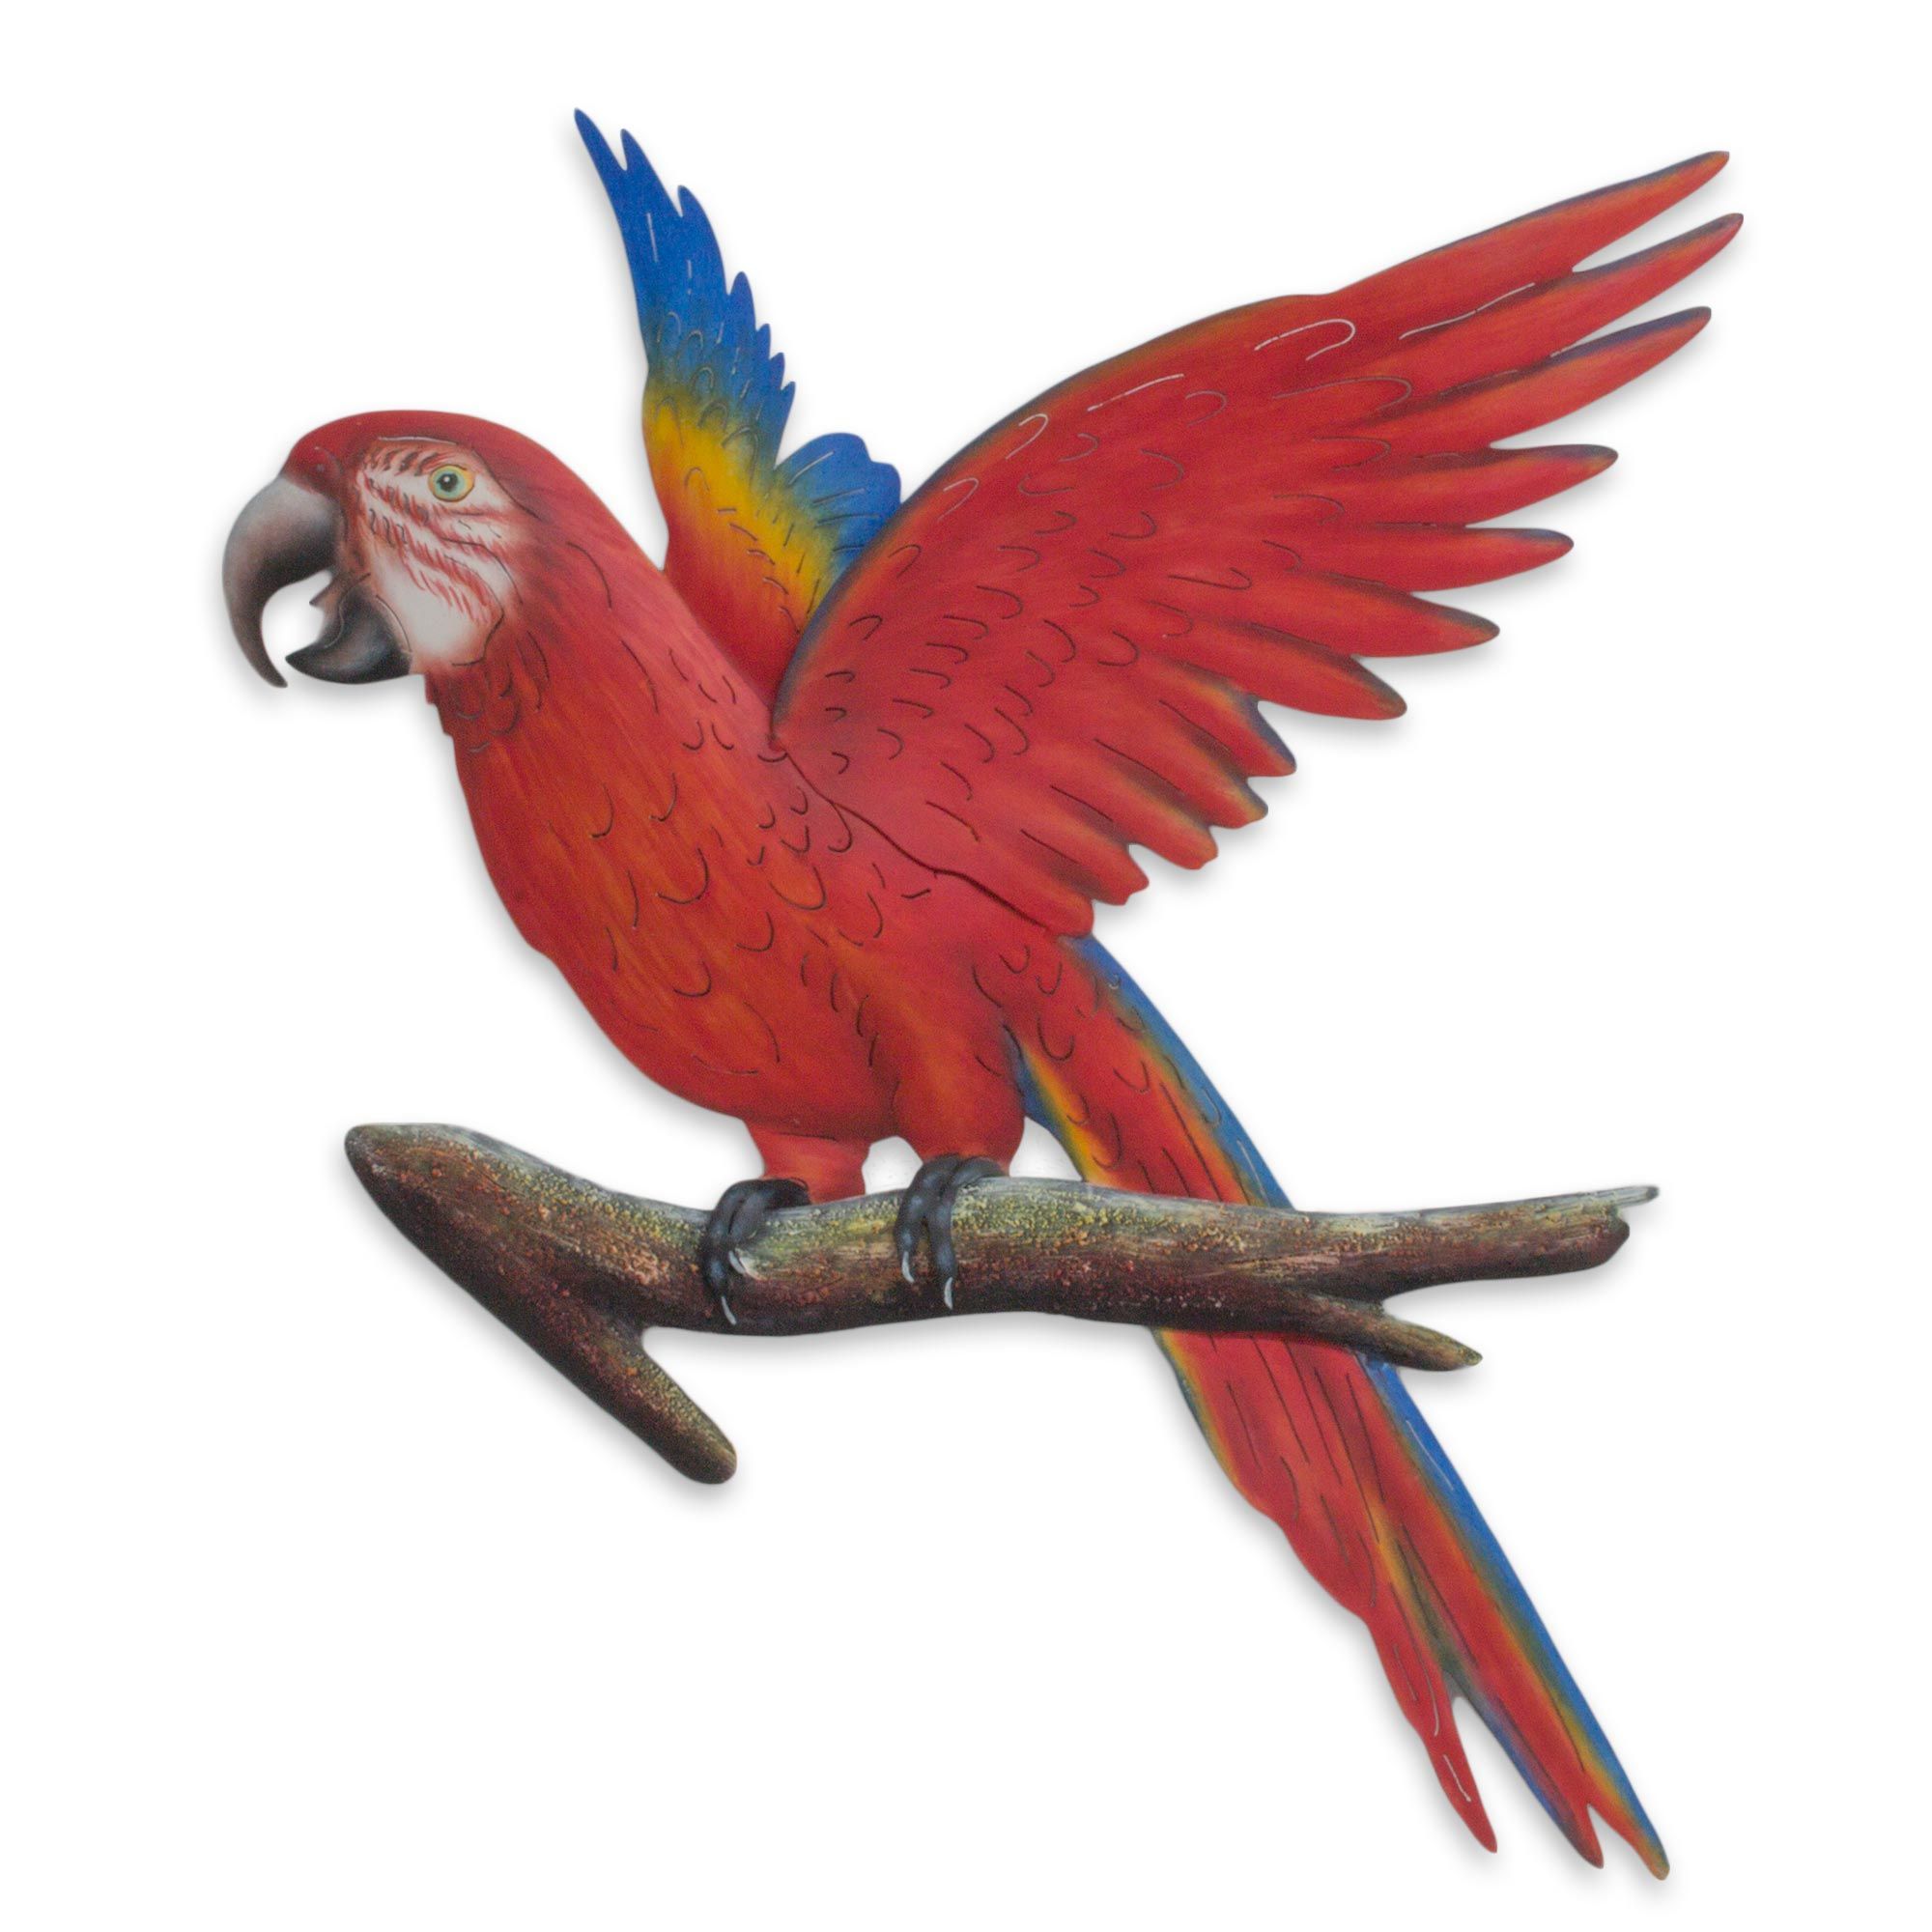 Unicef Market | Handcrafted Red Steel Bird Theme Wall Sculpture From Mexico  – Scarlet Macaw Pertaining To Recent Bird Macaw Wall Sculpture (View 2 of 20)